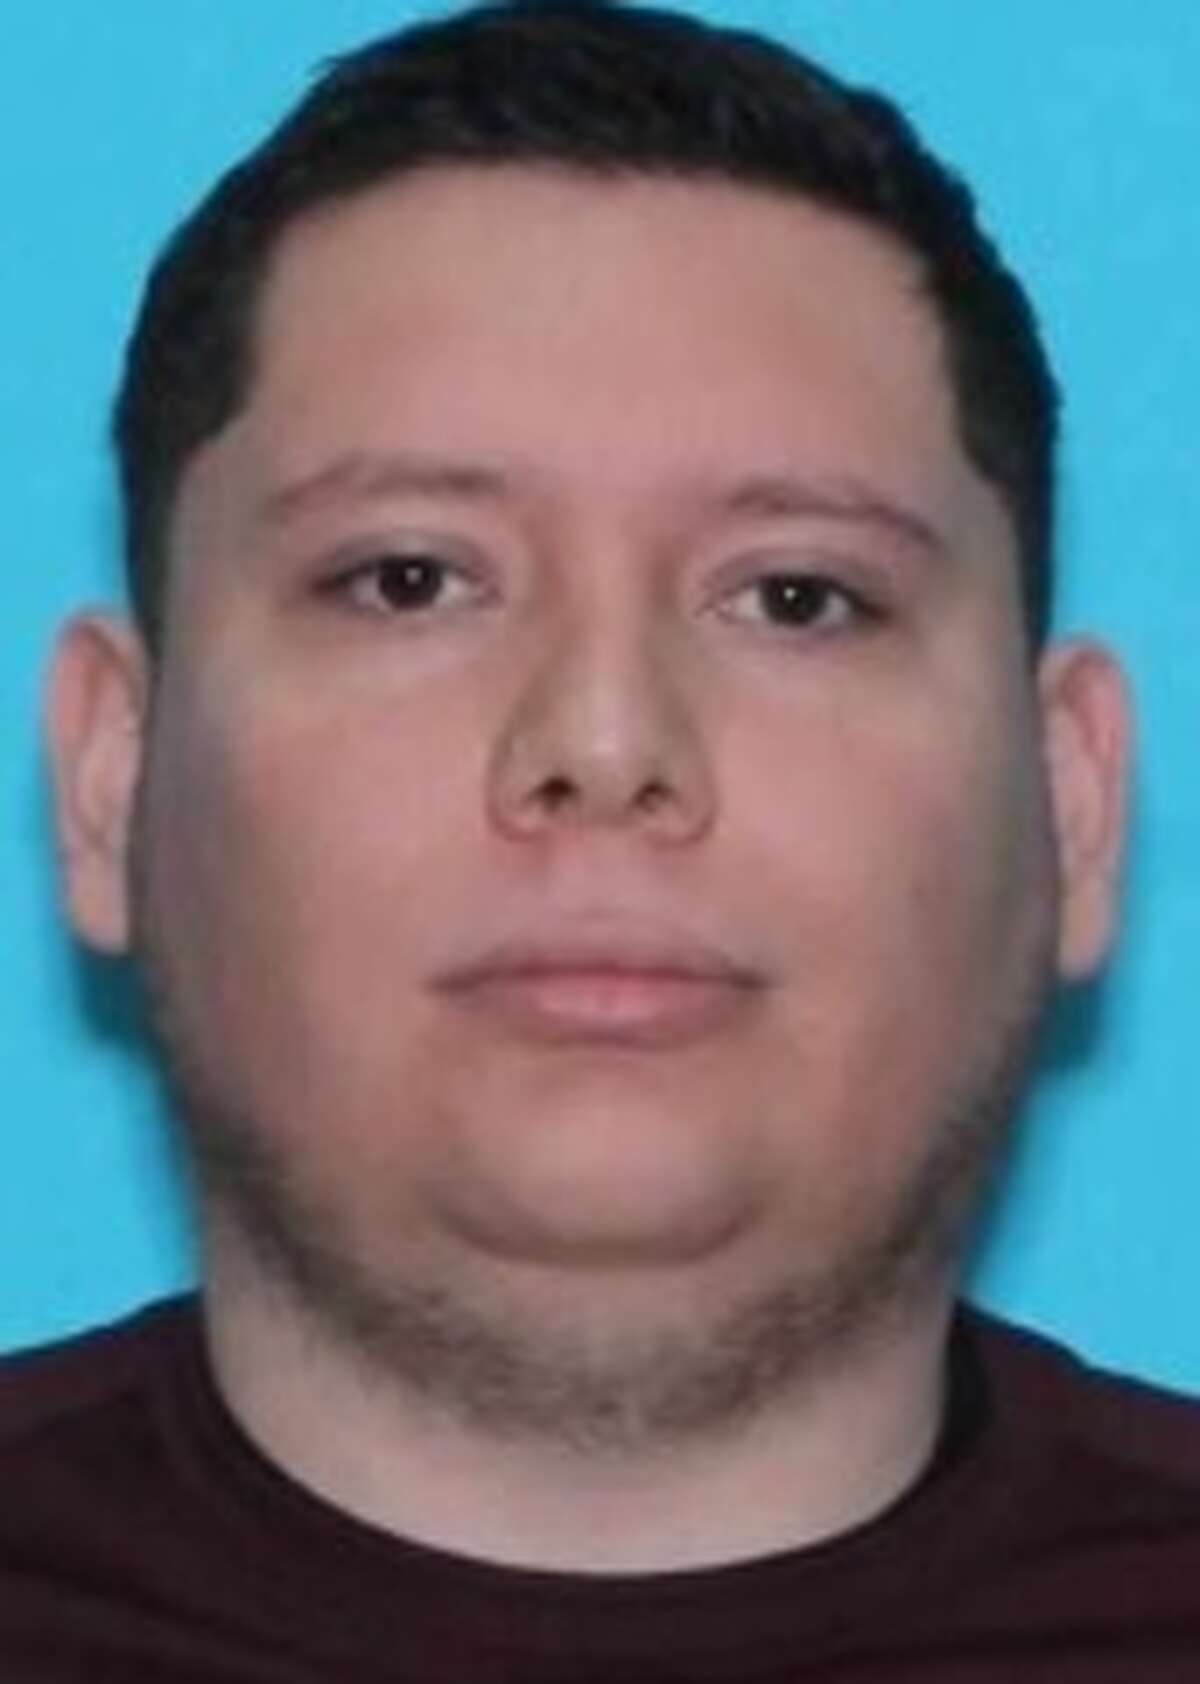 The FBI San Antonio Division reported on Tuesday, Feb. 22, 2022 that 28-year-old Laredo man Sergio Armando Rangel III went missing in Monterrey, Mexico on Jan. 27, 2022. The FBI believes he may be in Nuevo Laredo.